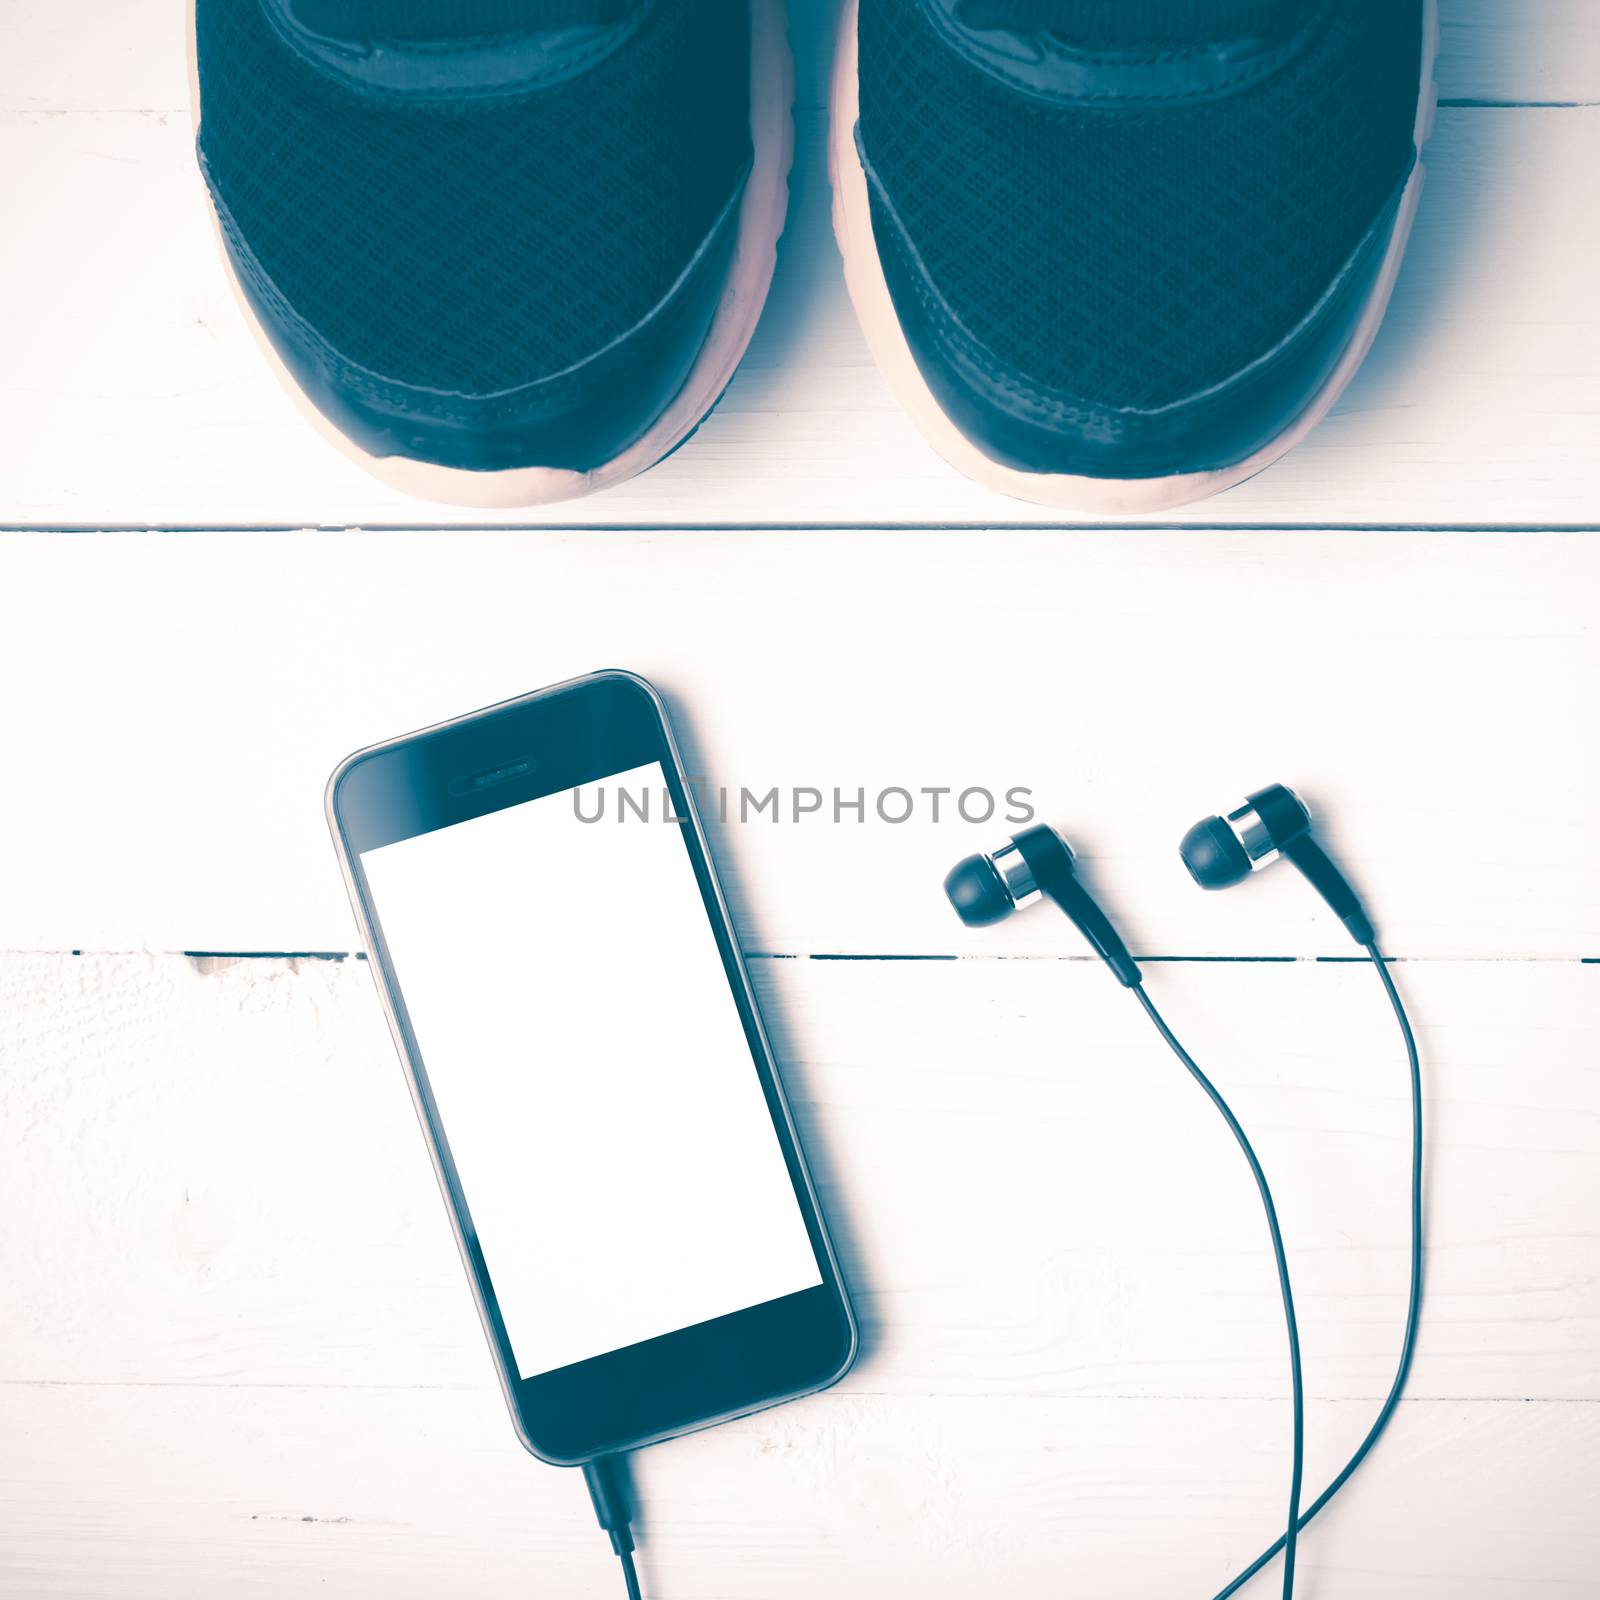 running shoes and phone vintage style by ammza12